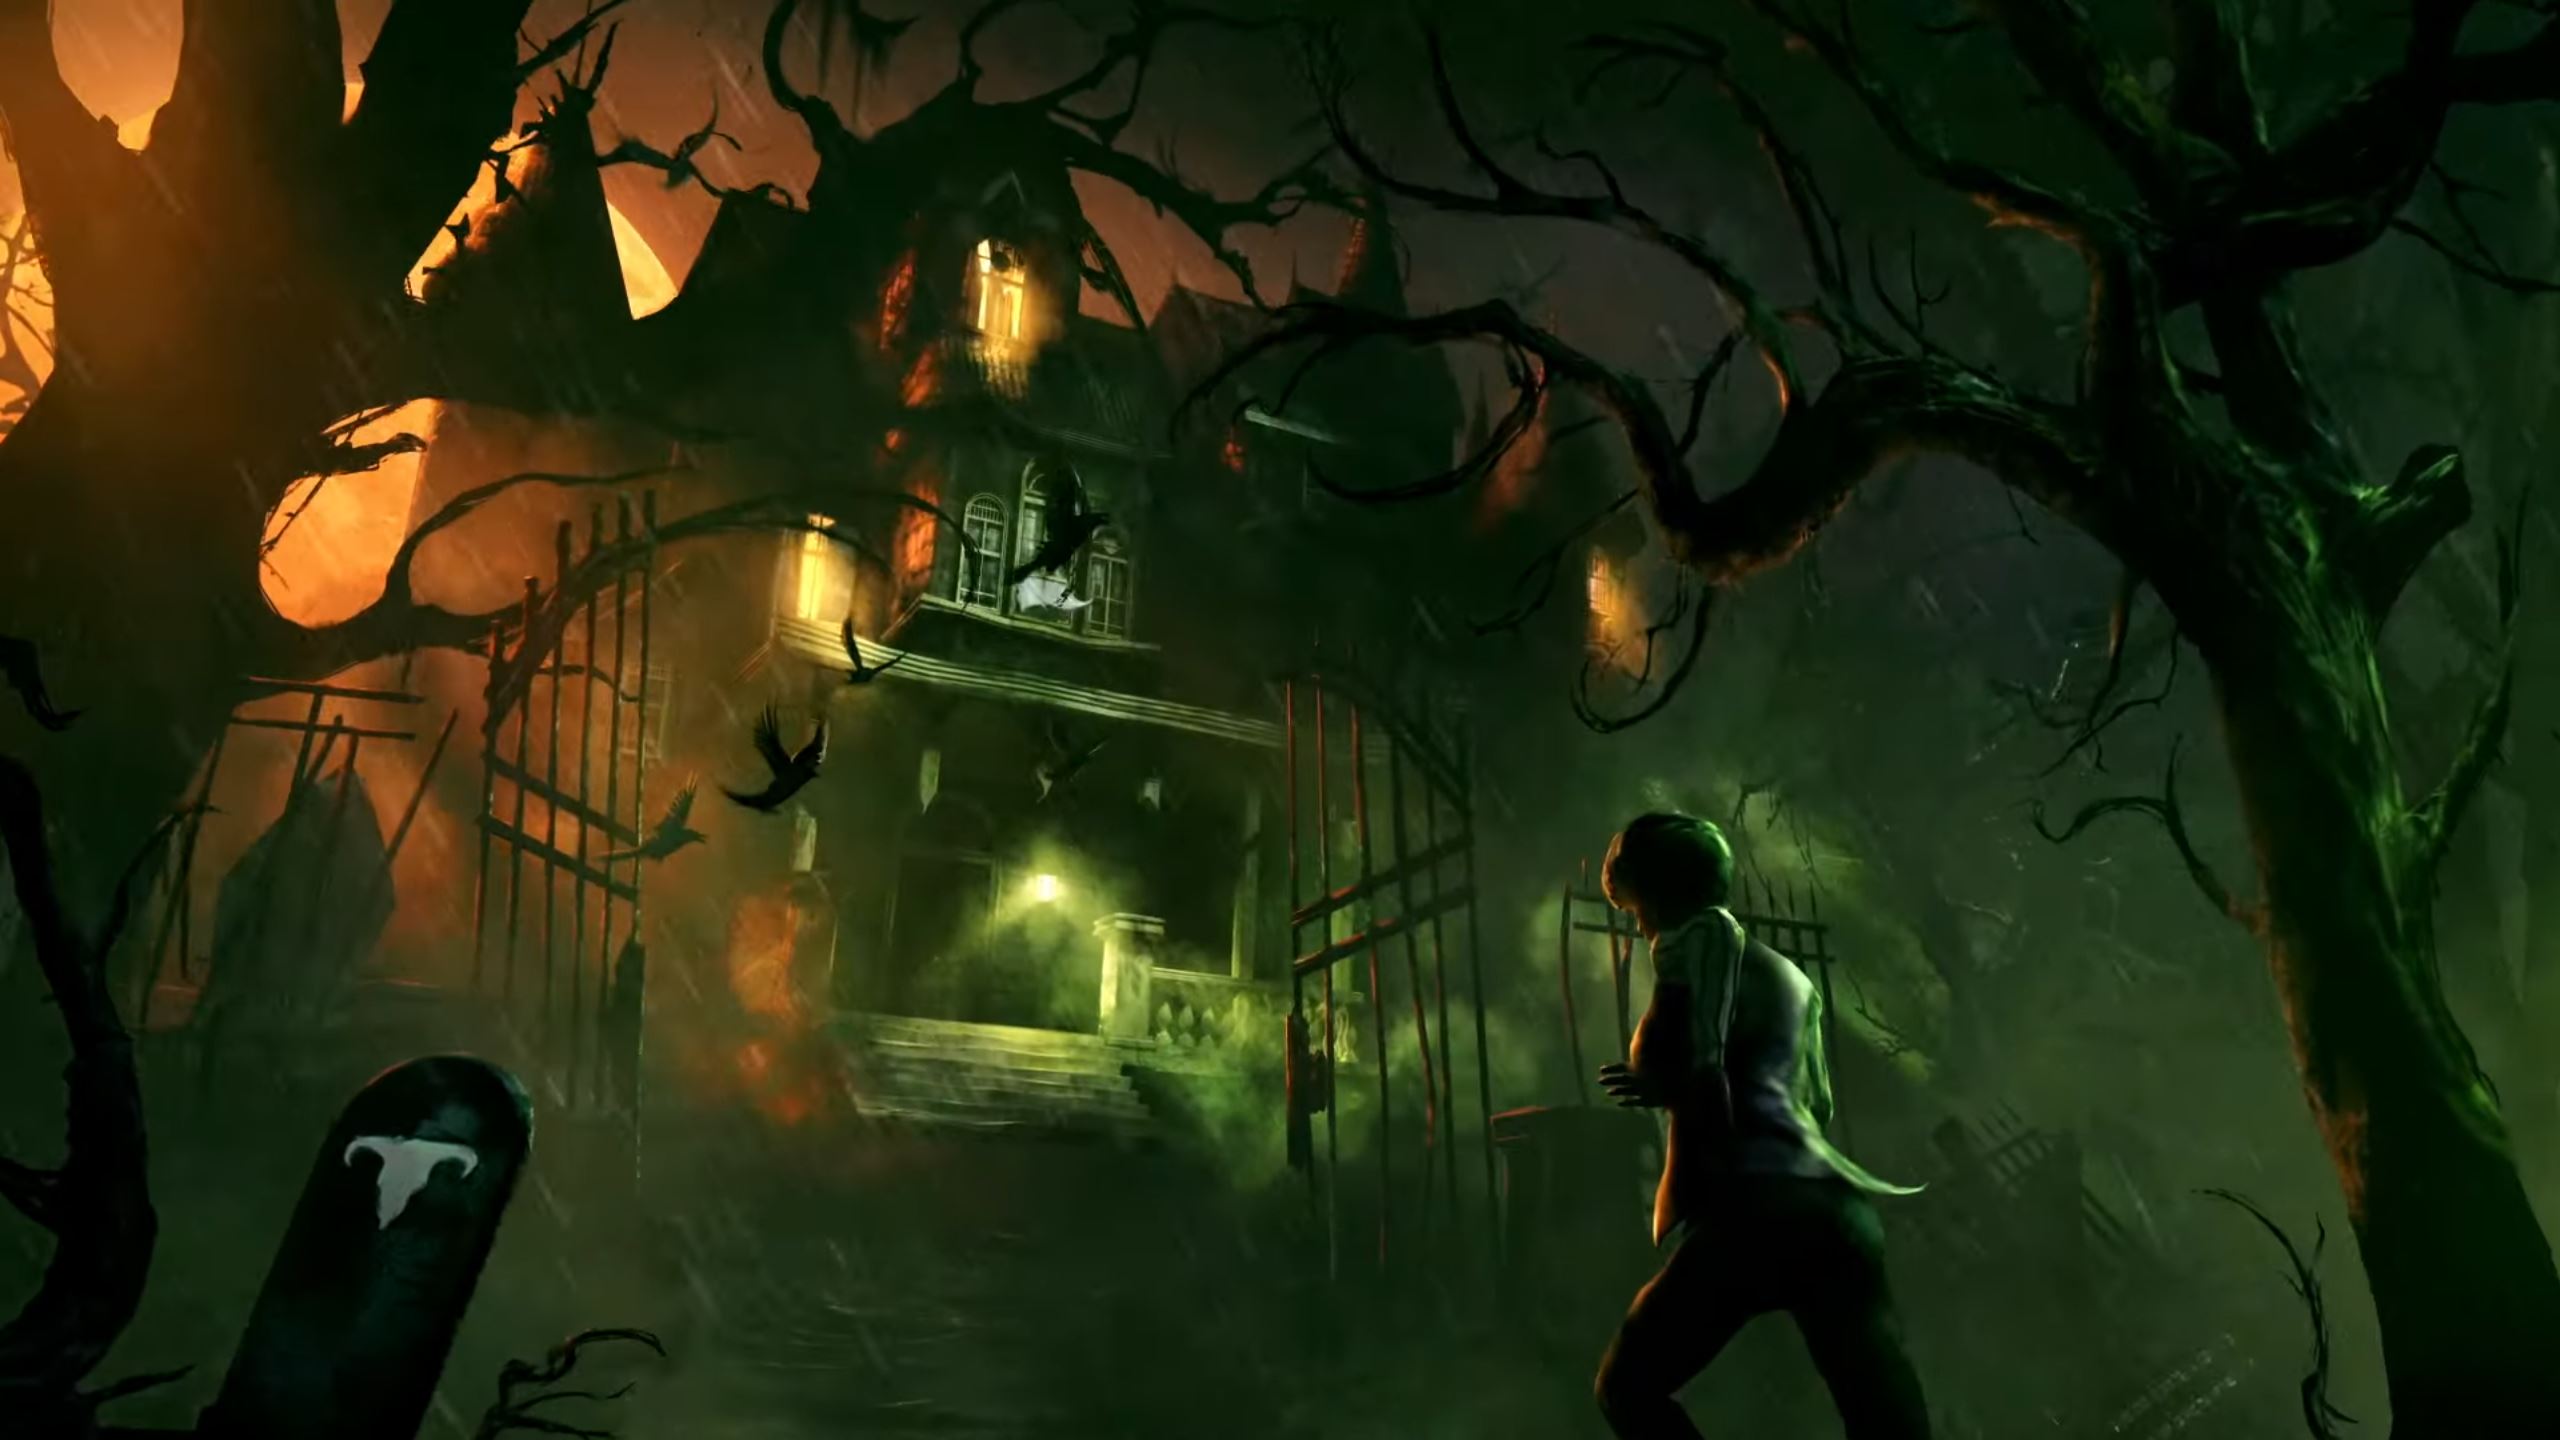 A woman walks through the wrought iron gate of a creepy old house. The sky is red, and the ground covered in green mist.